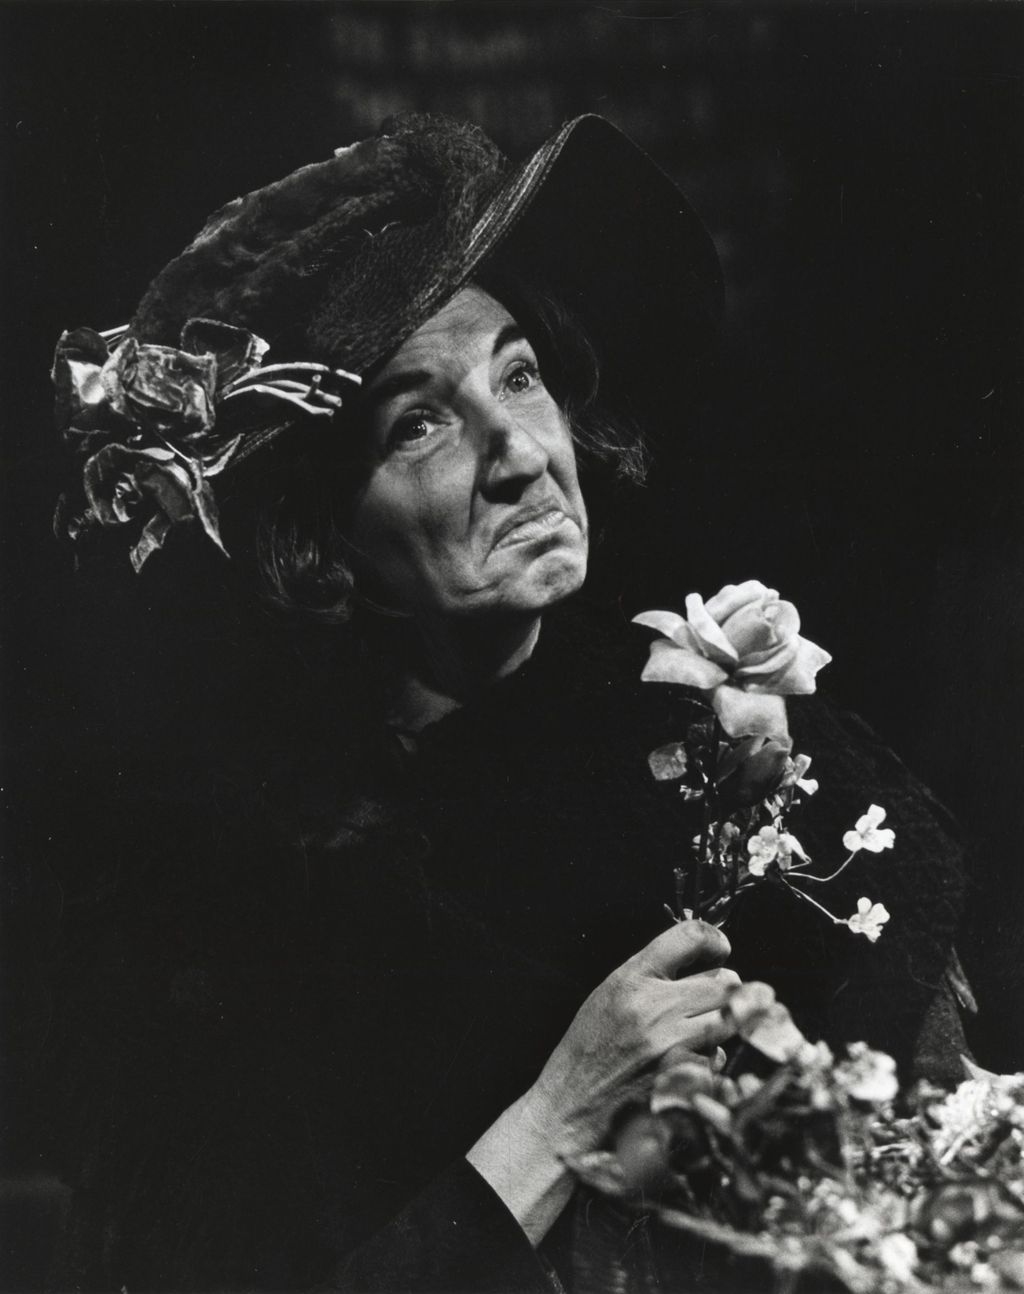 Miniature of Rose Bormacher on stage in a production of "The Threepenny Opera" at Hull-House Theater